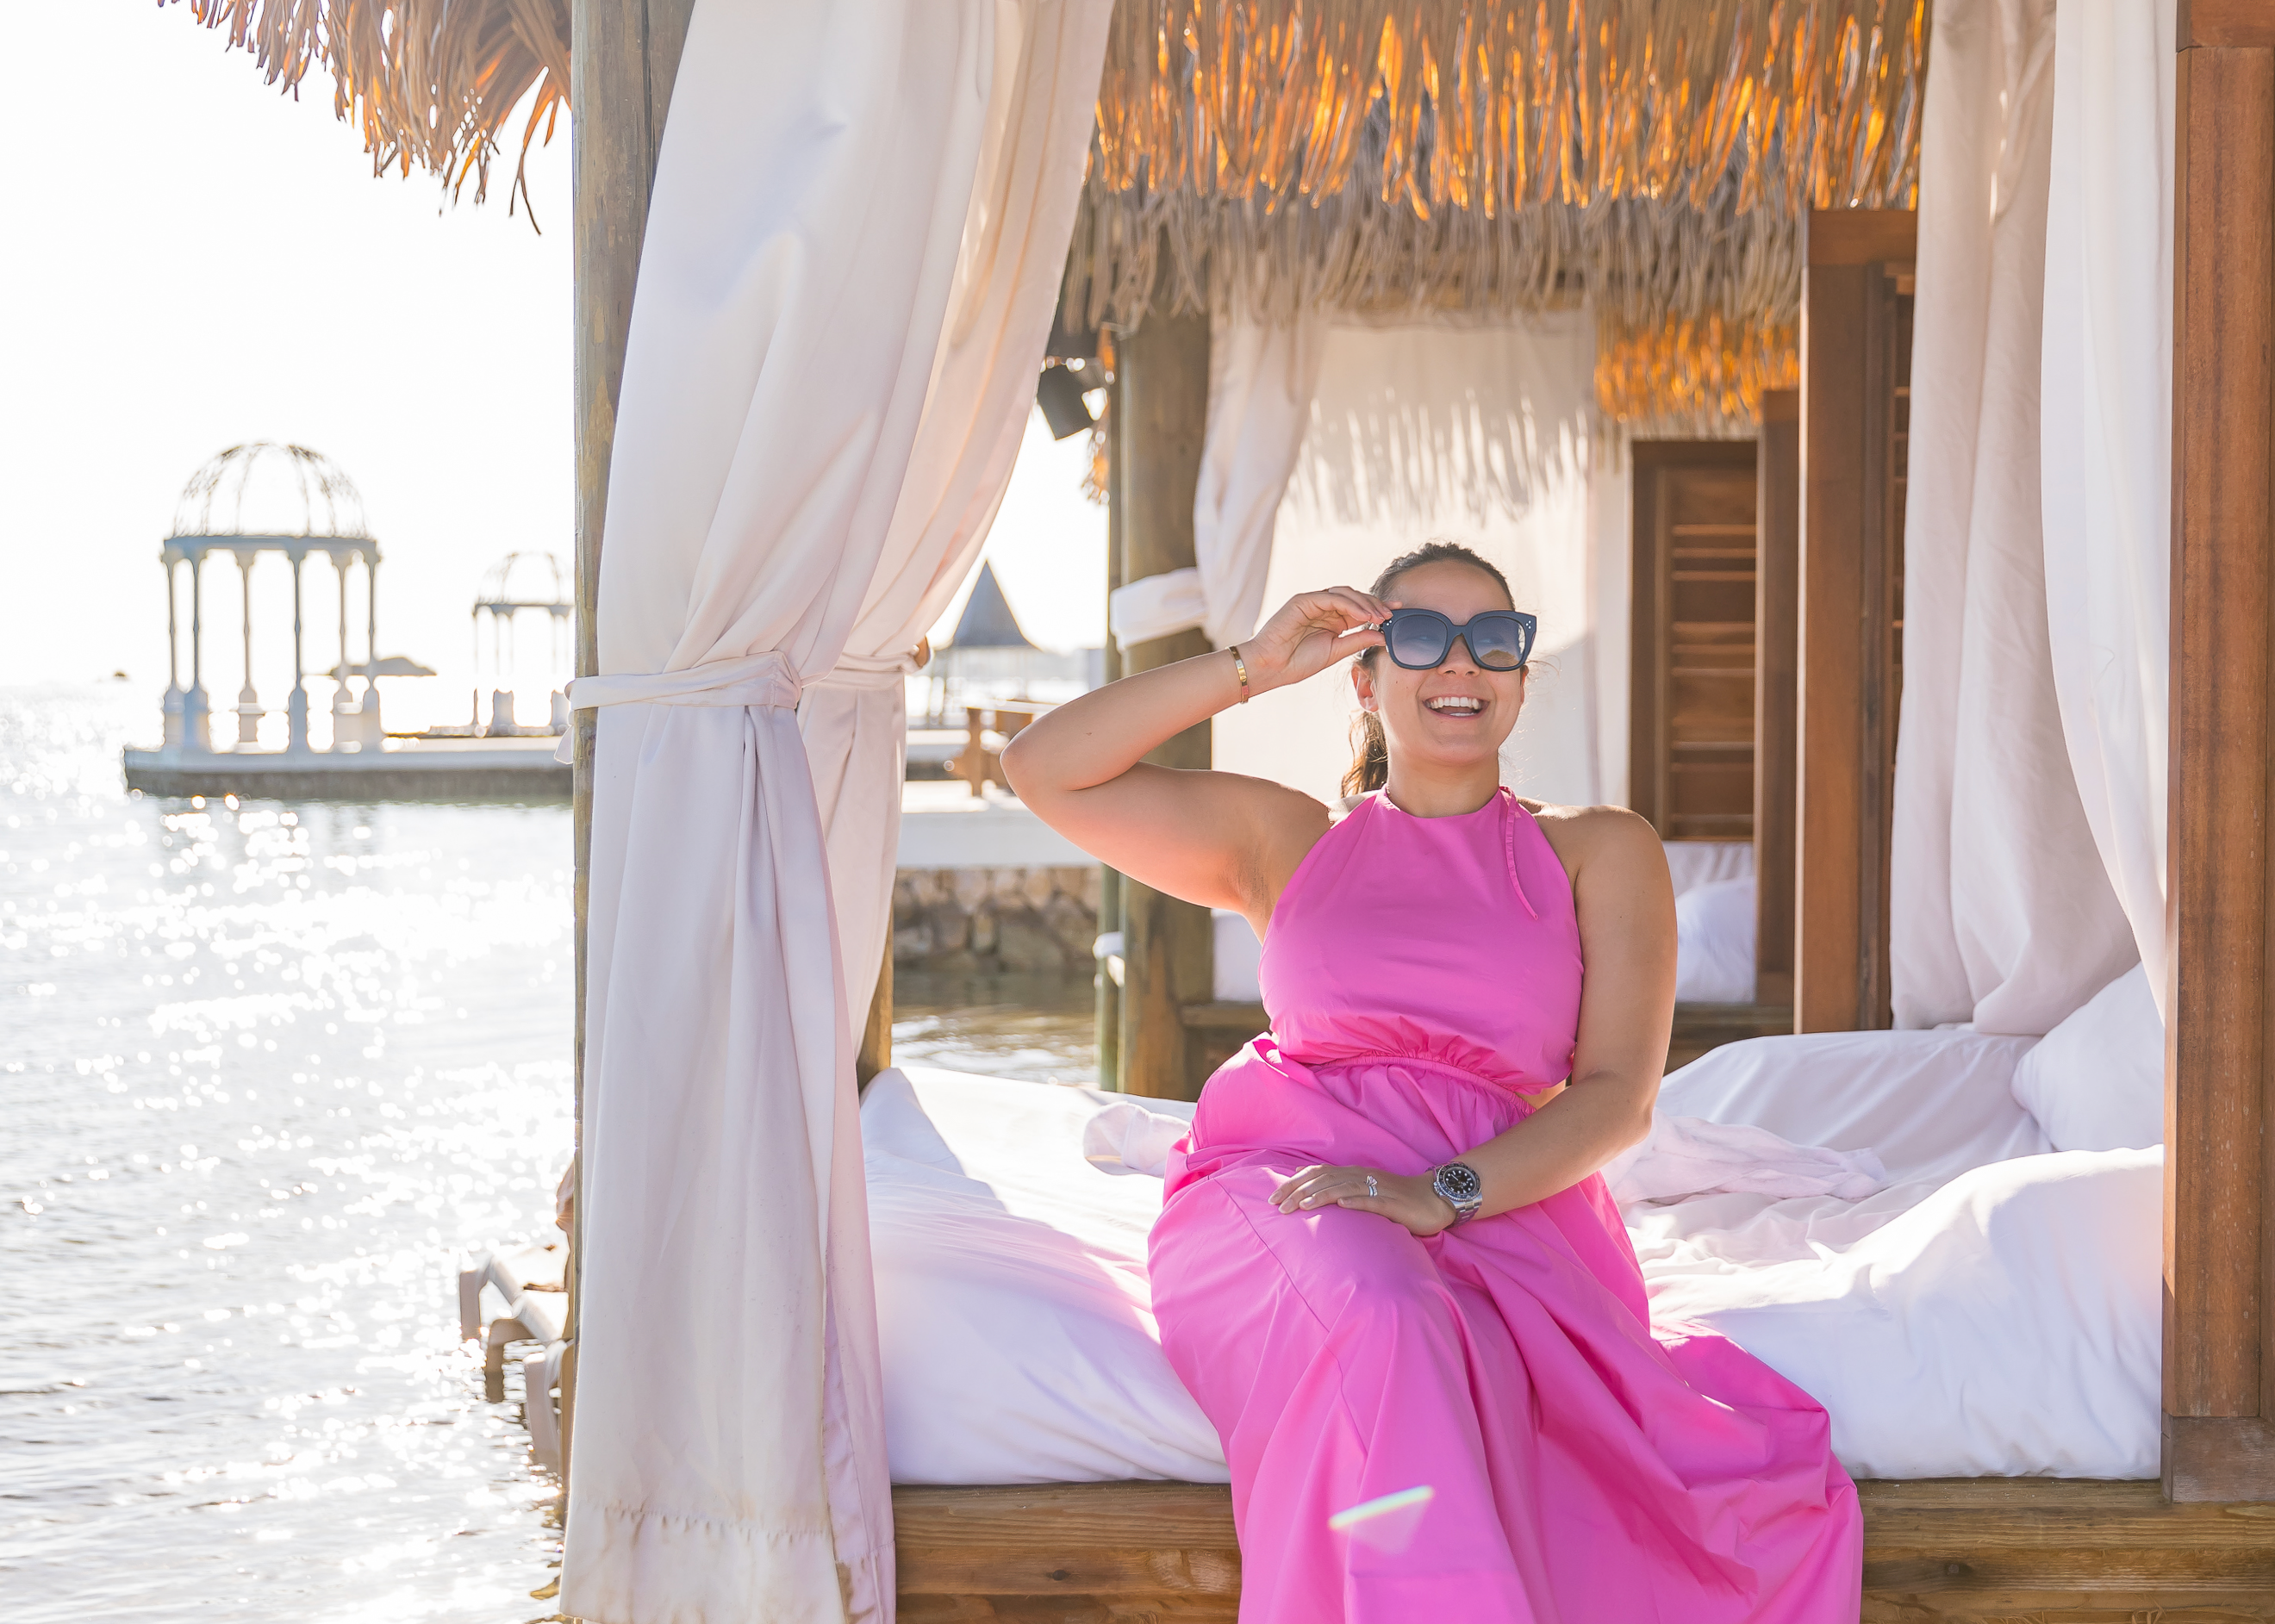 jqlouise travel guide to sandals jamaica